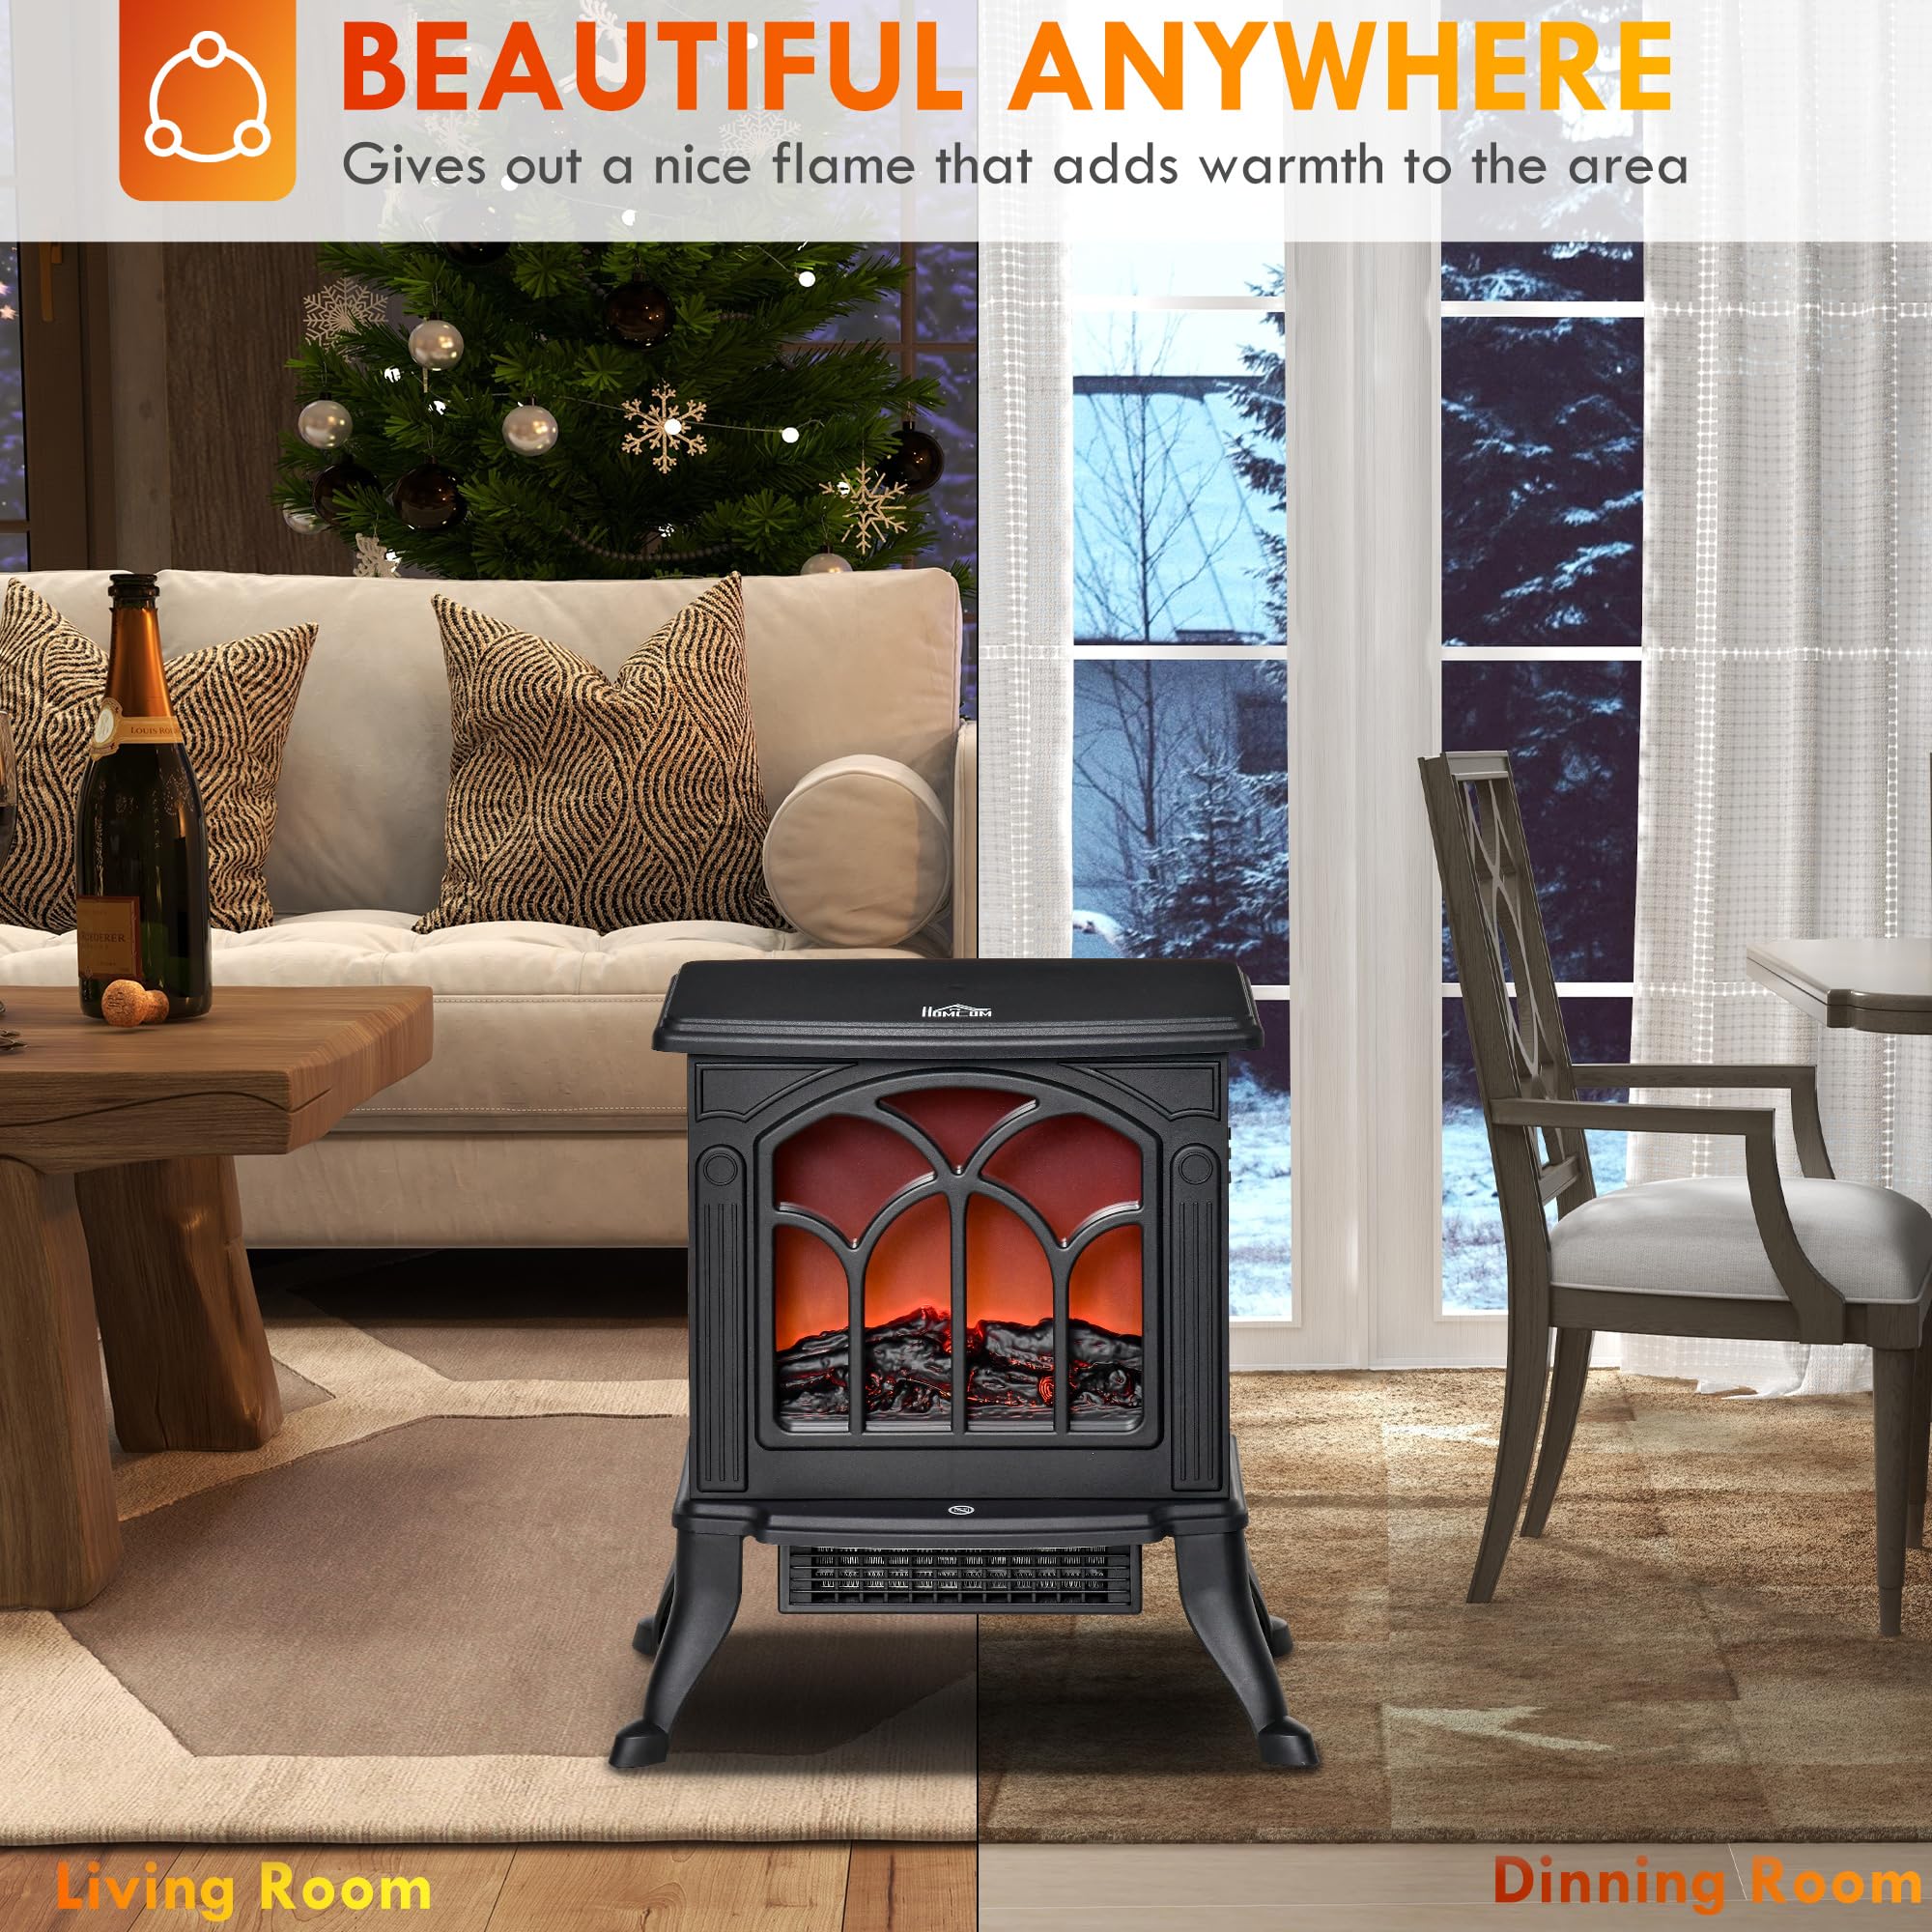 HOMCOM 17" Freestanding Electric Fireplace Stove, Fire Place Heater with Realistic Logs and Flame Effect, Adjustable Temperature, and Overheat Protection, 750W/1500W, Black